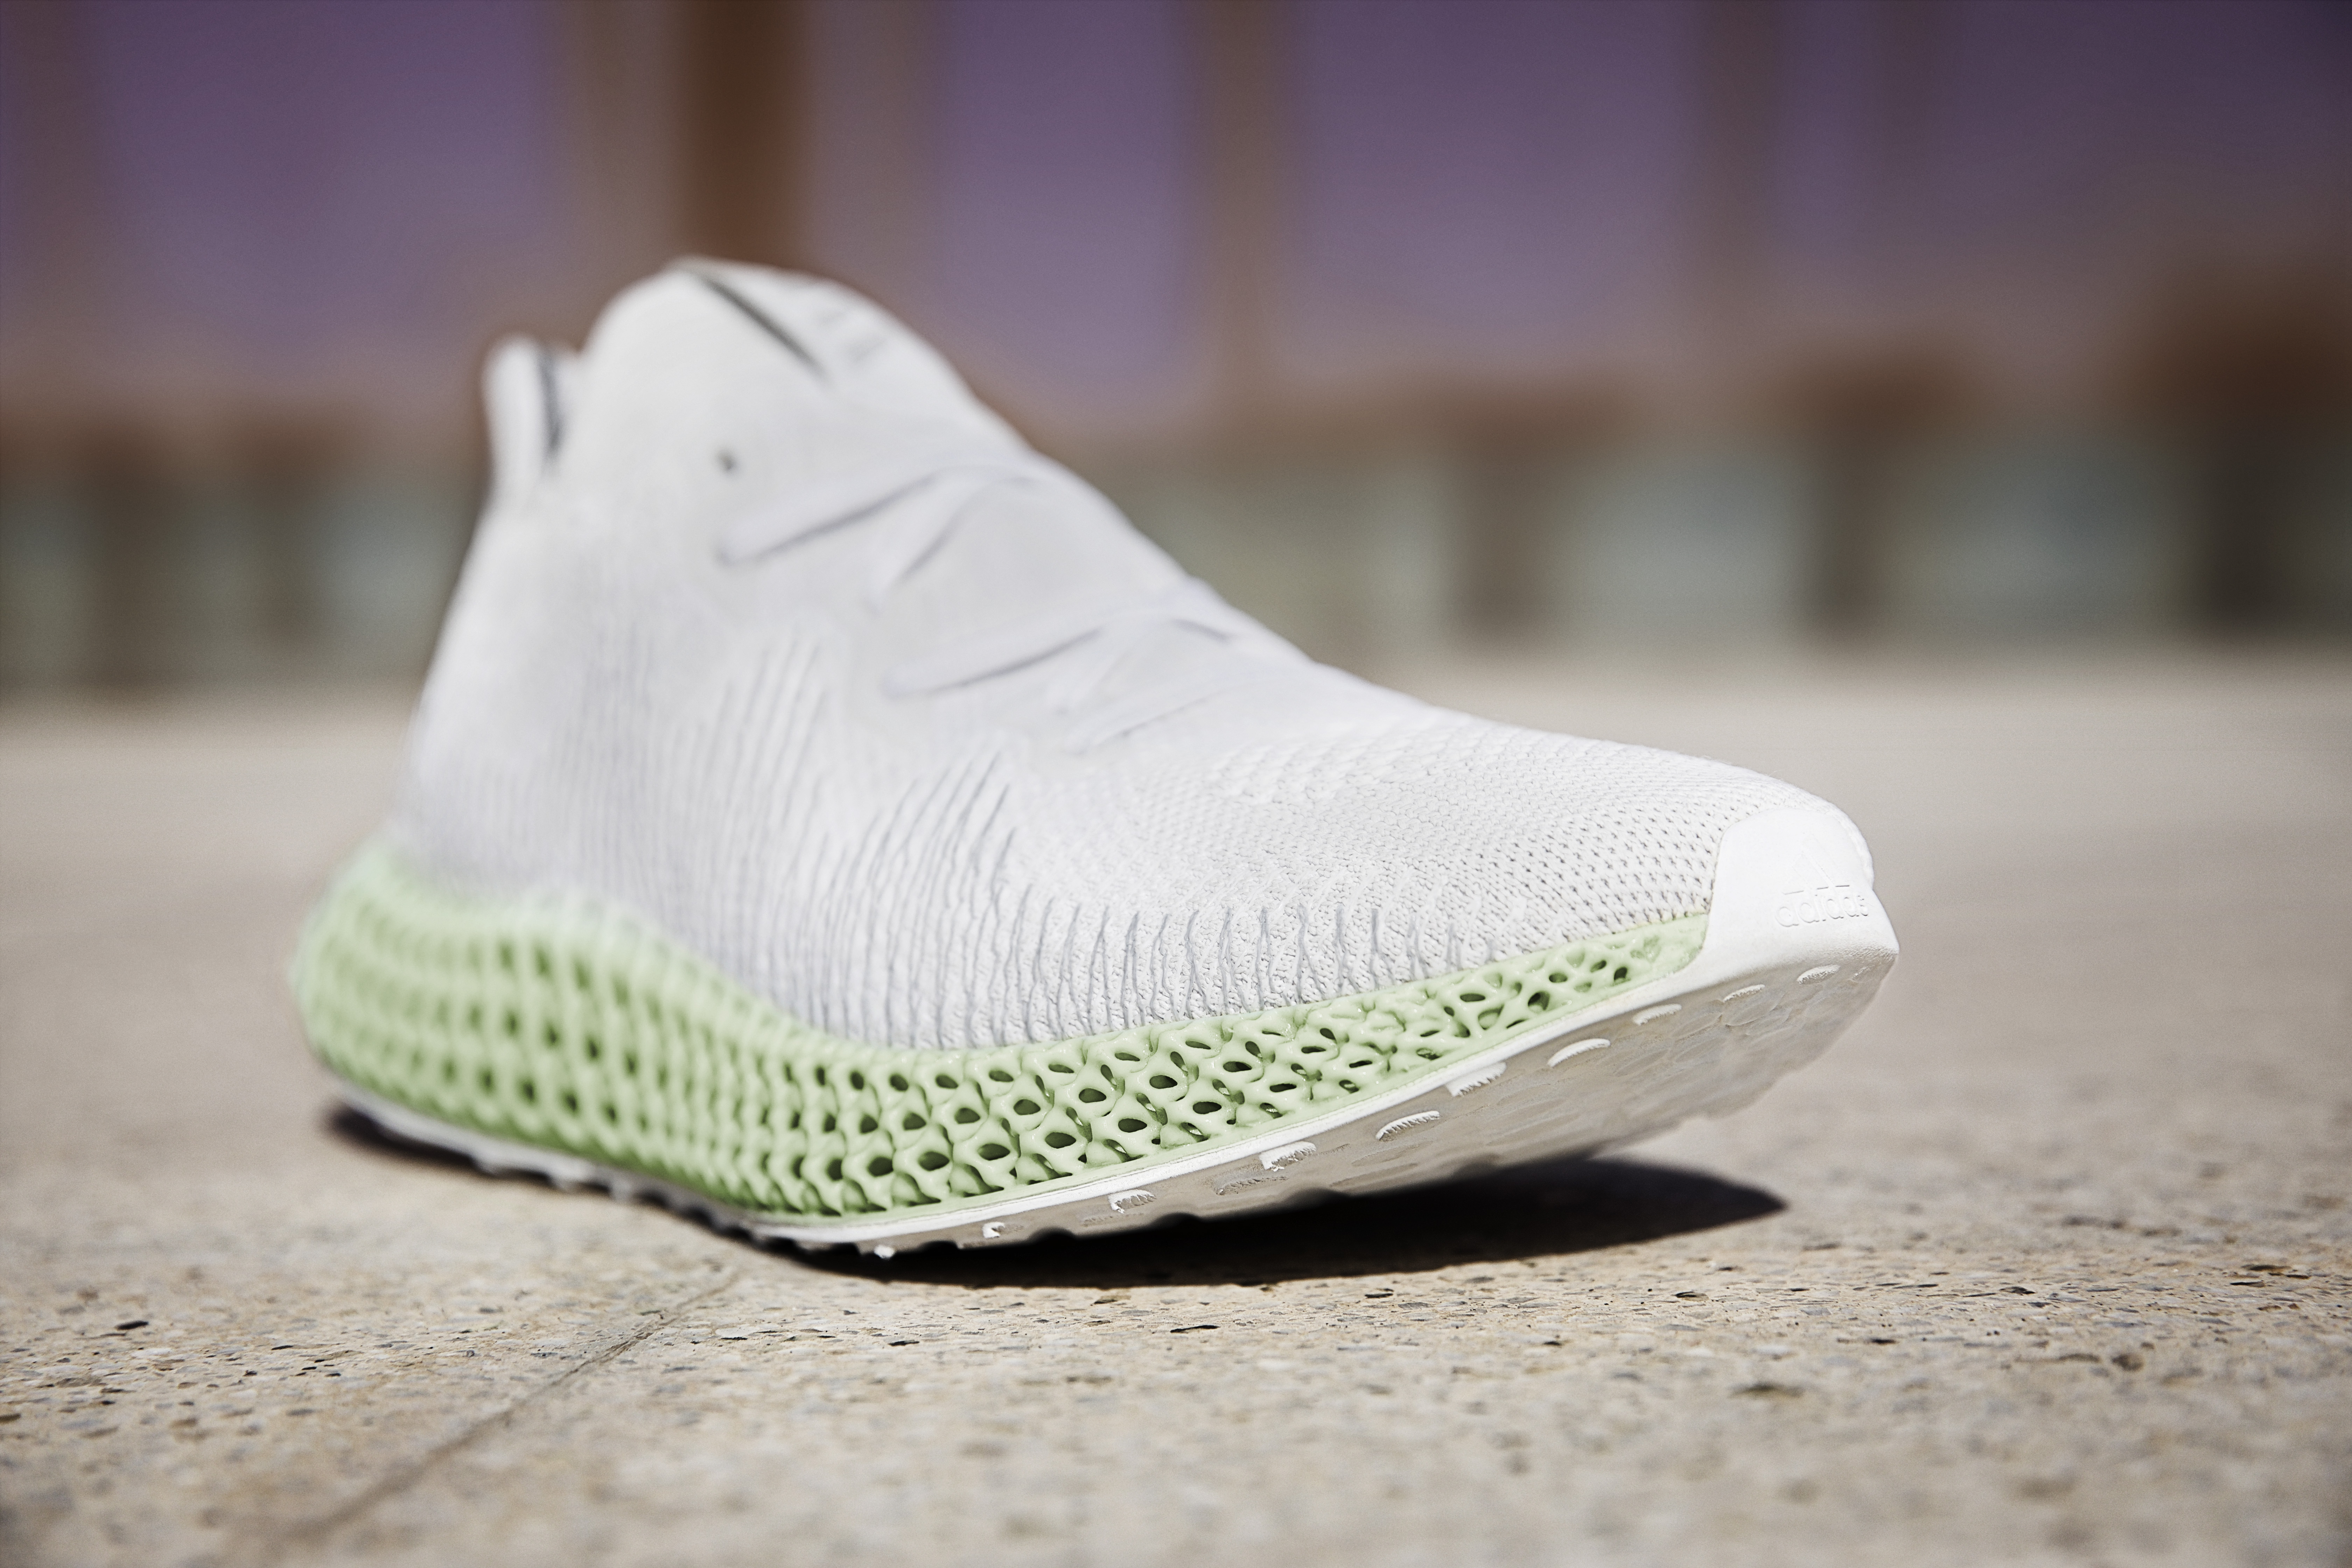 The Sneakers of the Future Are Here